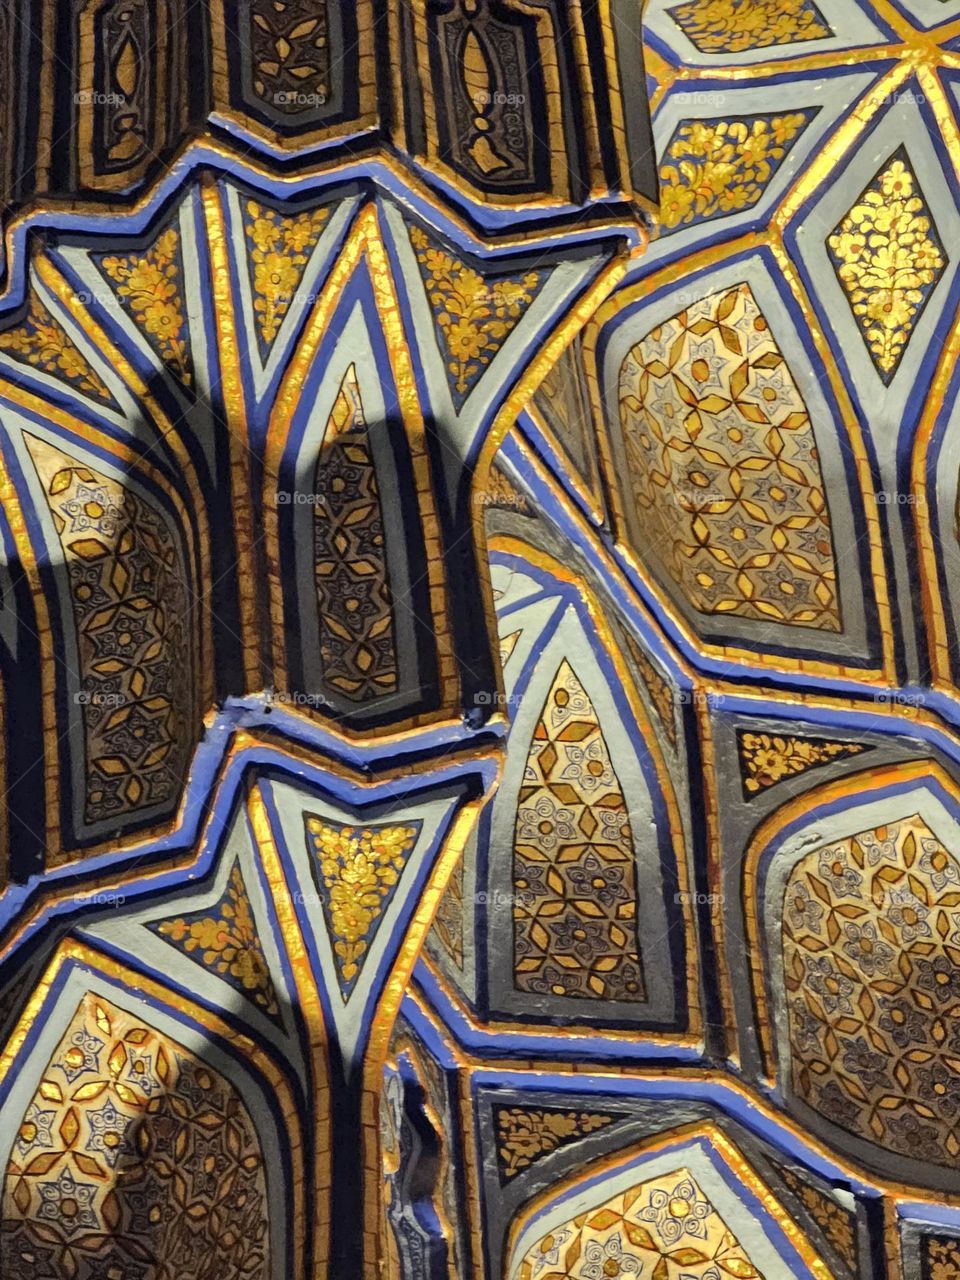 Ceiling of a tomb in Samarkand